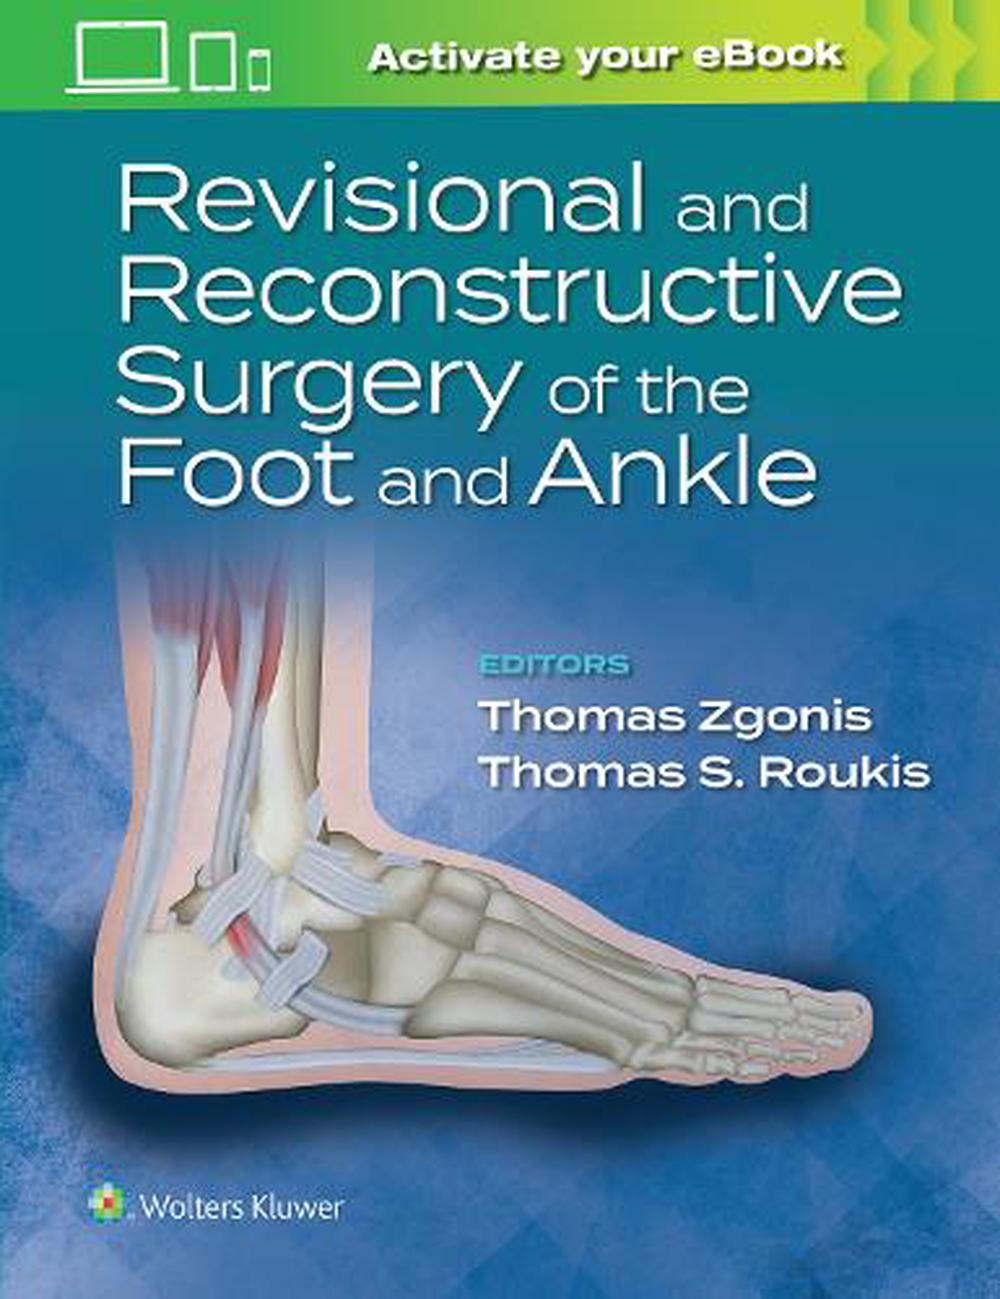 Revisional　The　the　Hardcover,　Foot　and　Zgonis,　at　online　Ankle　Buy　of　Reconstructive　9781975160821　Nile　by　and　Surgery　Thomas